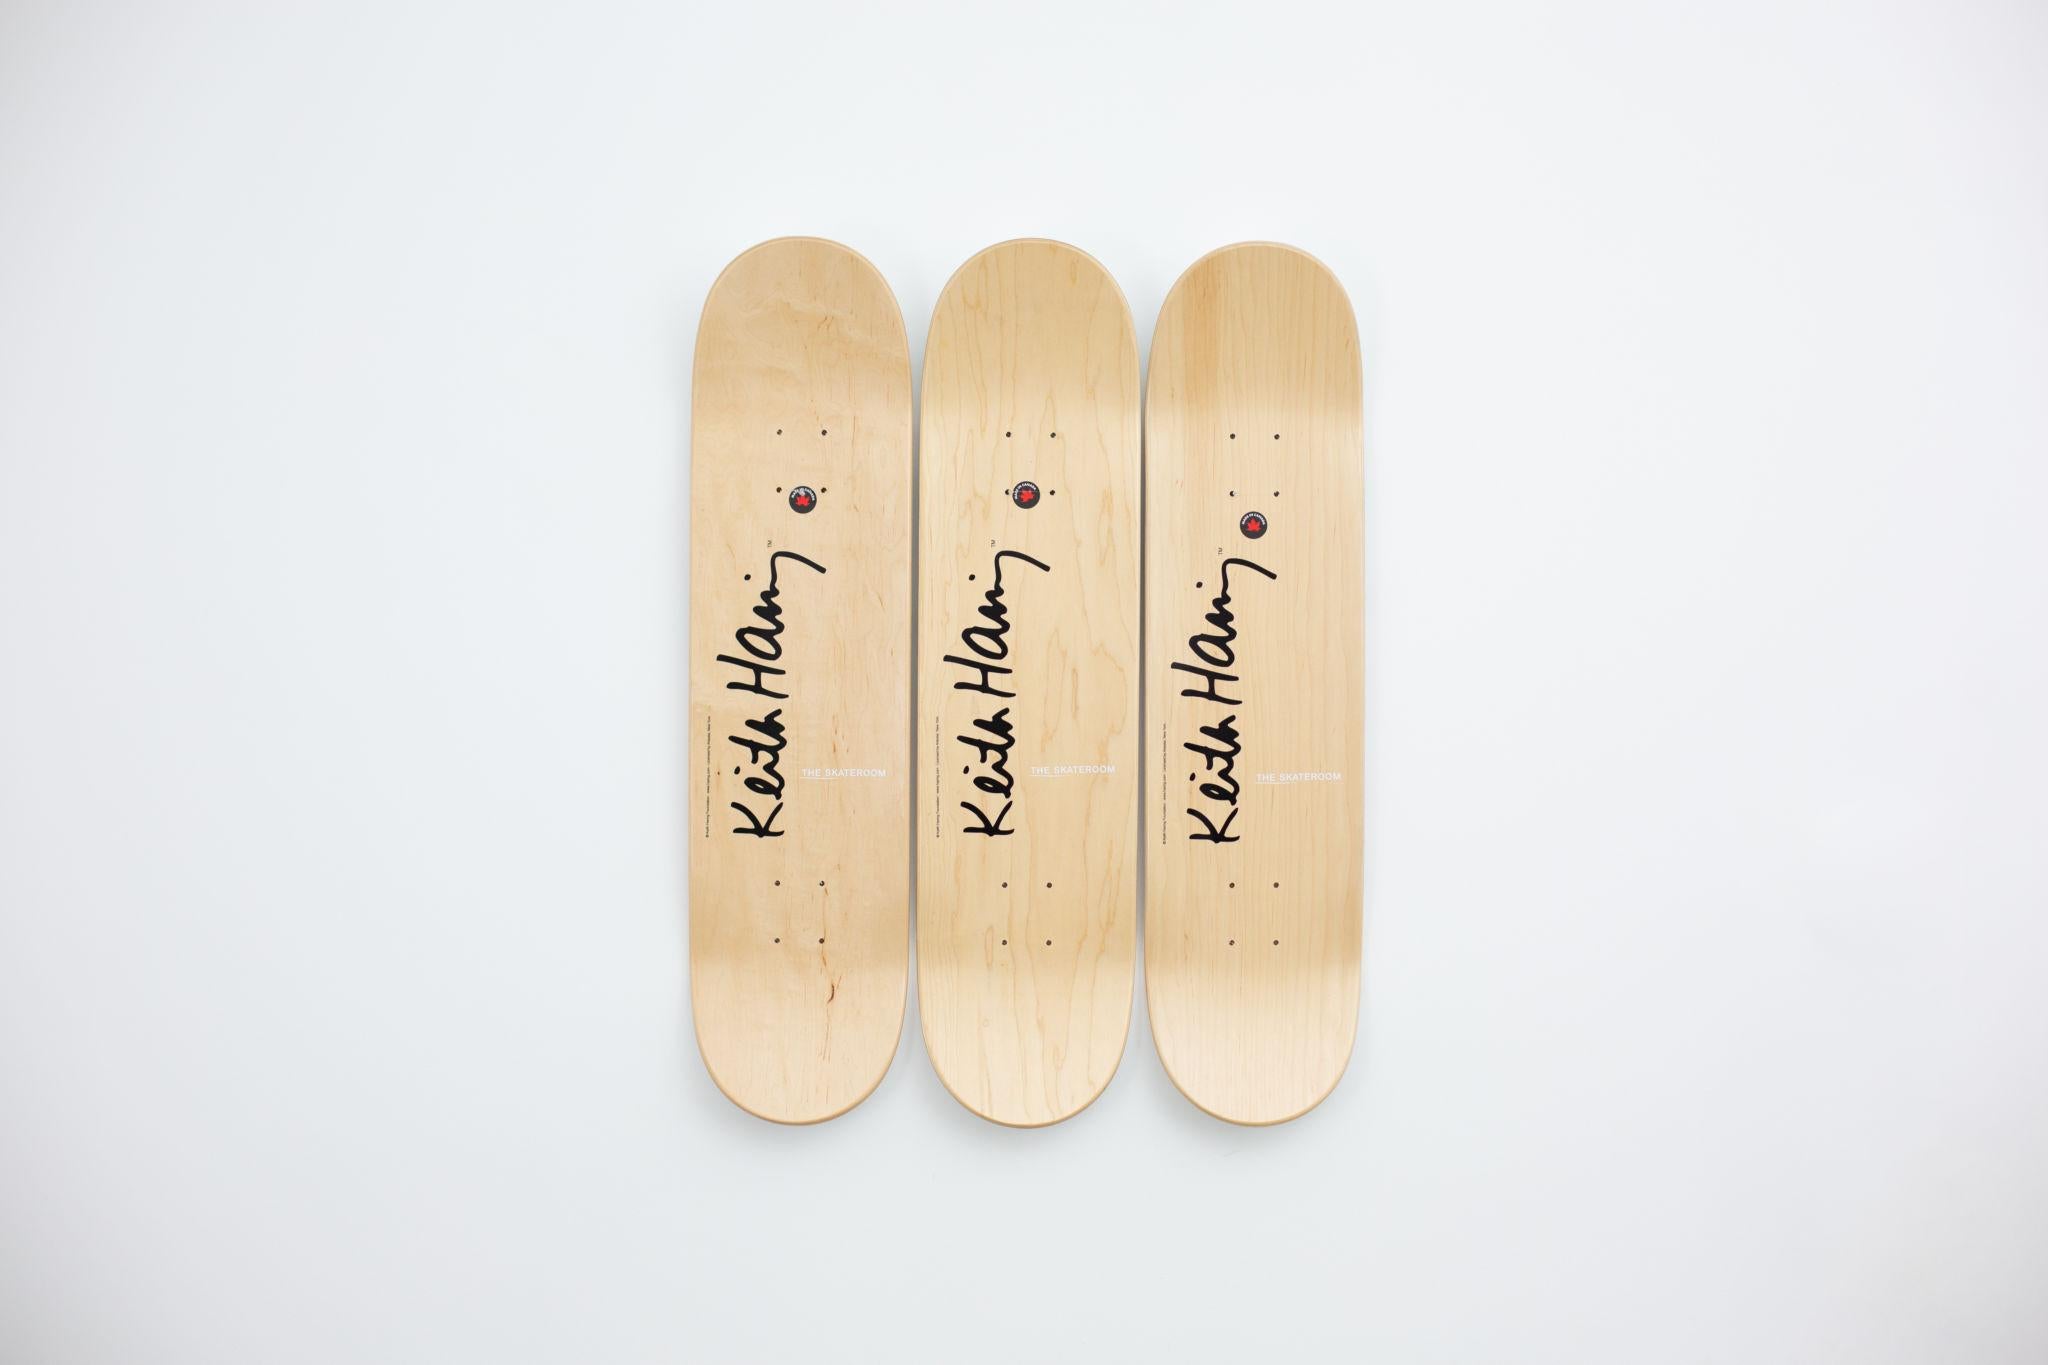 The Skateroom w/ ©Keith Haring Foundation
Set of 3 skateboard decks
7-Ply Canadian Maplewood with screen-print
31 H x 8 inches, each
Mounting hardware included
Open edition (screen-printed signature)
Licensed by Artestar, New York

This